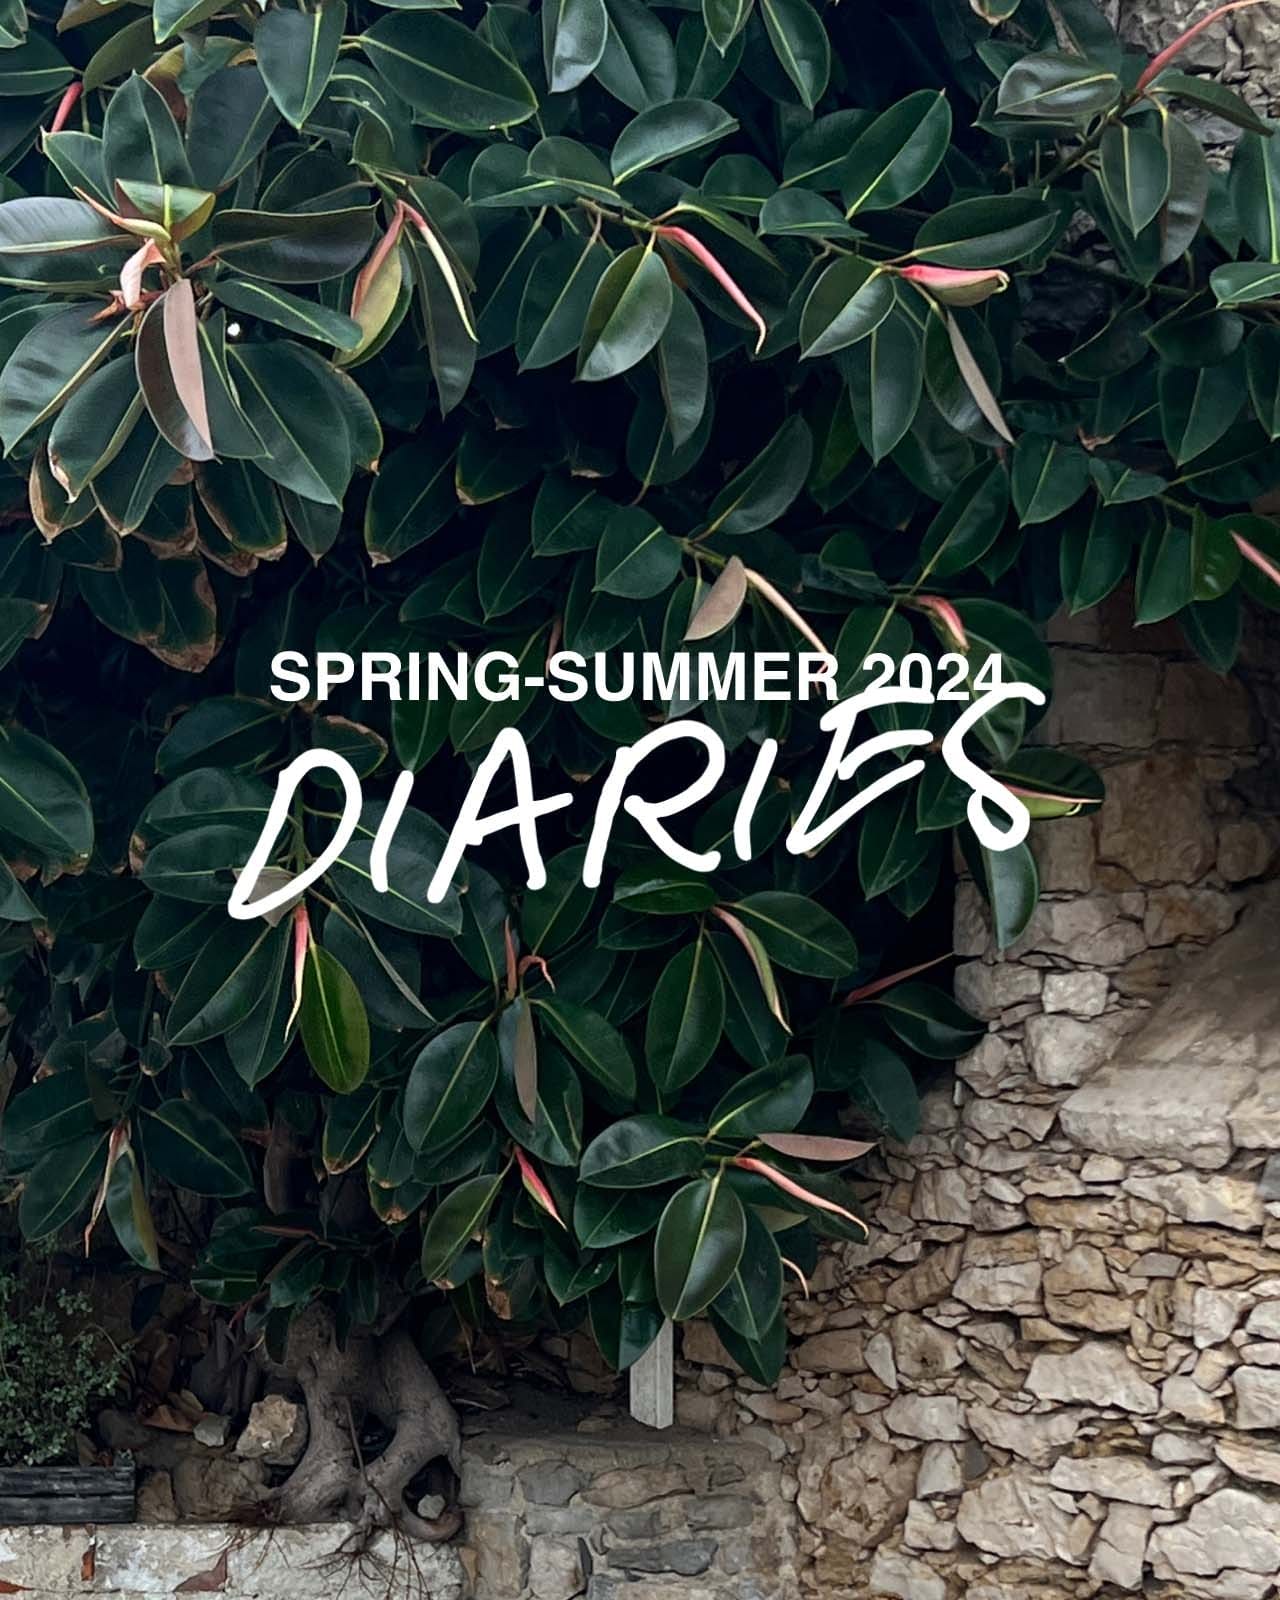 Plant with text overlay that reads "Spring-summer 2024 diaries"